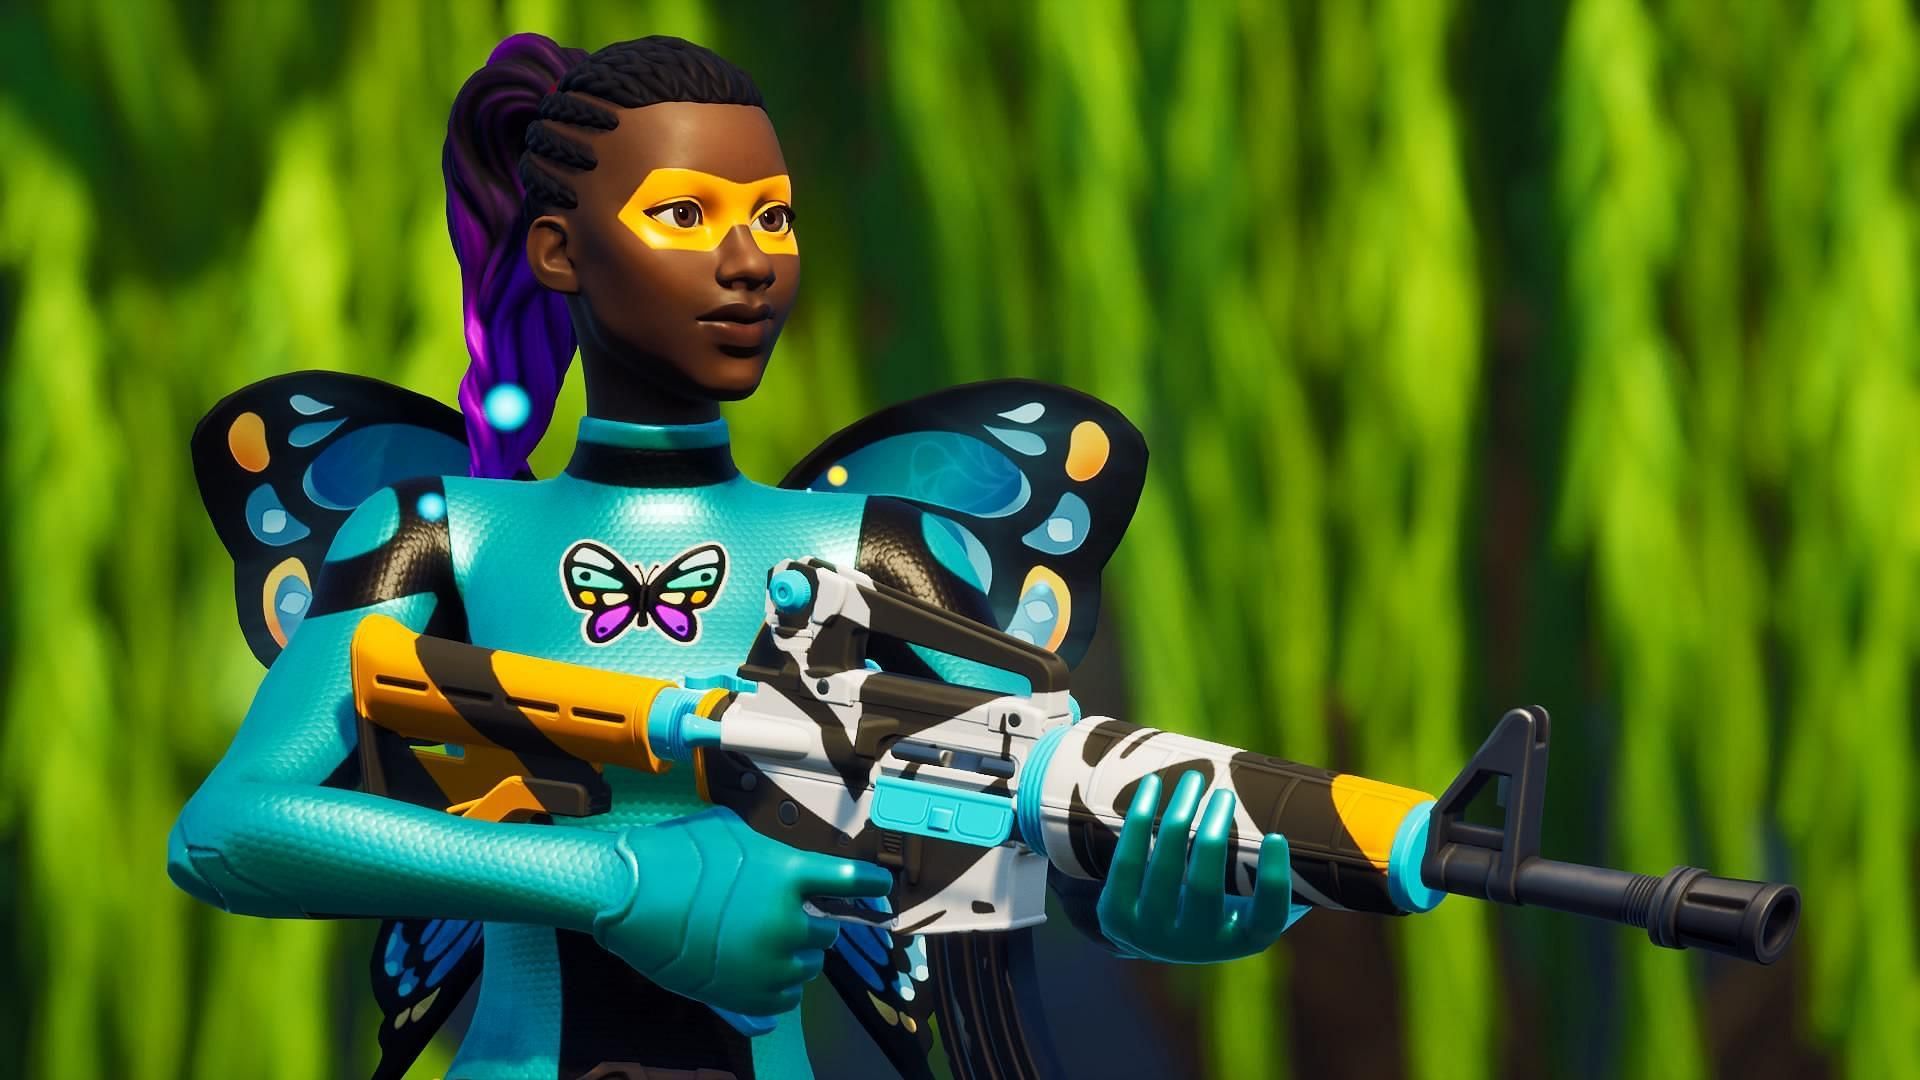 Backlash is one of the most popular Fortnite skins in the current season (Image via Epic Games)